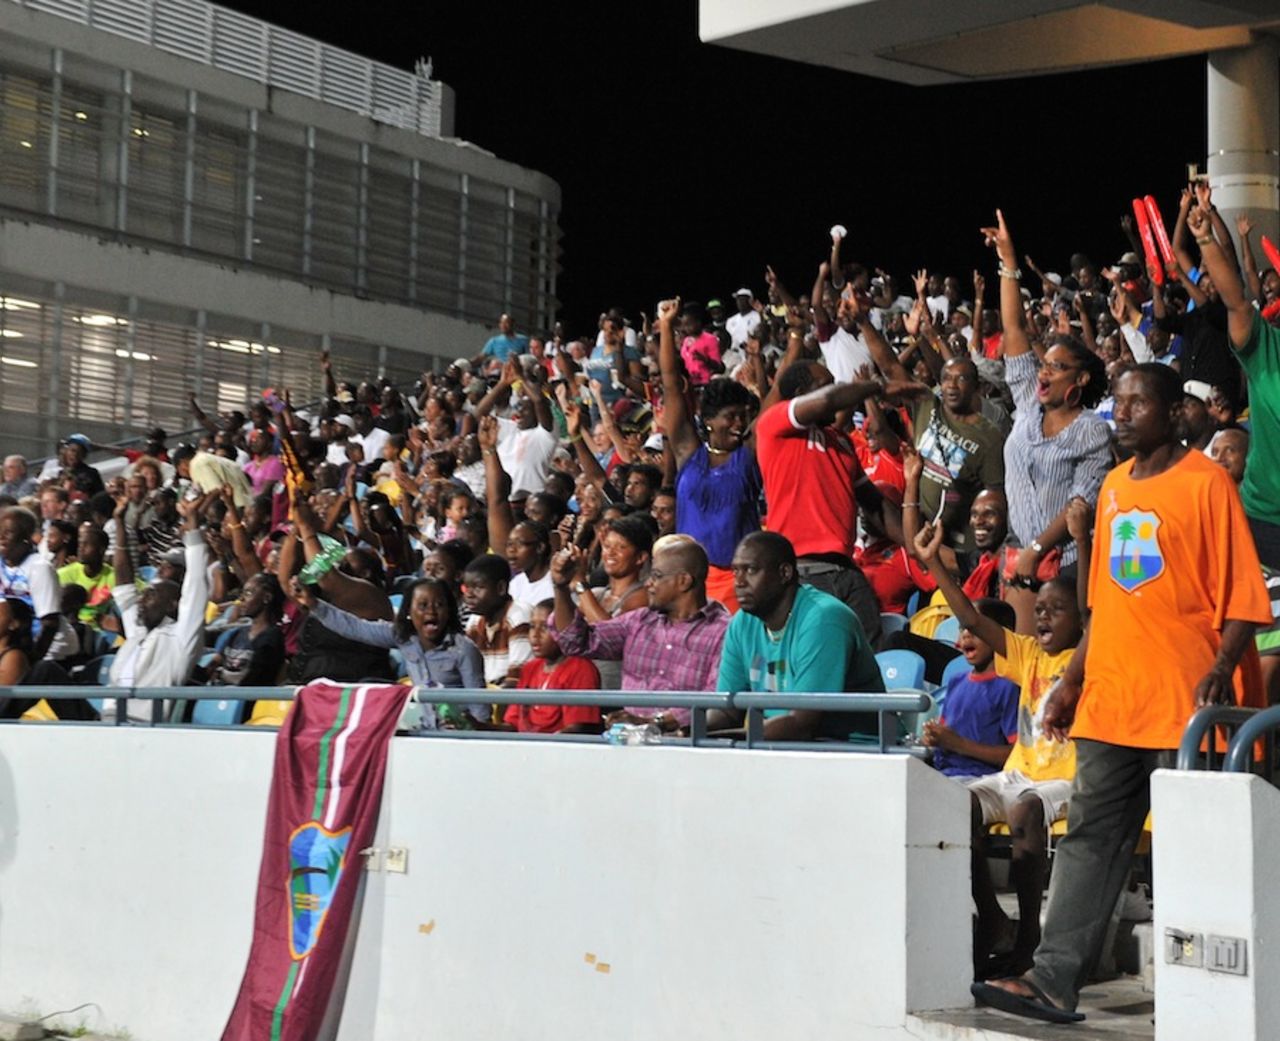 A large crowd gathers to cheer the home team in the Women's Tri-Nation T20 match in Bridgetown, West Indies v England, Women's Tri-Nation T20, Bridgetown, October 18, 2013